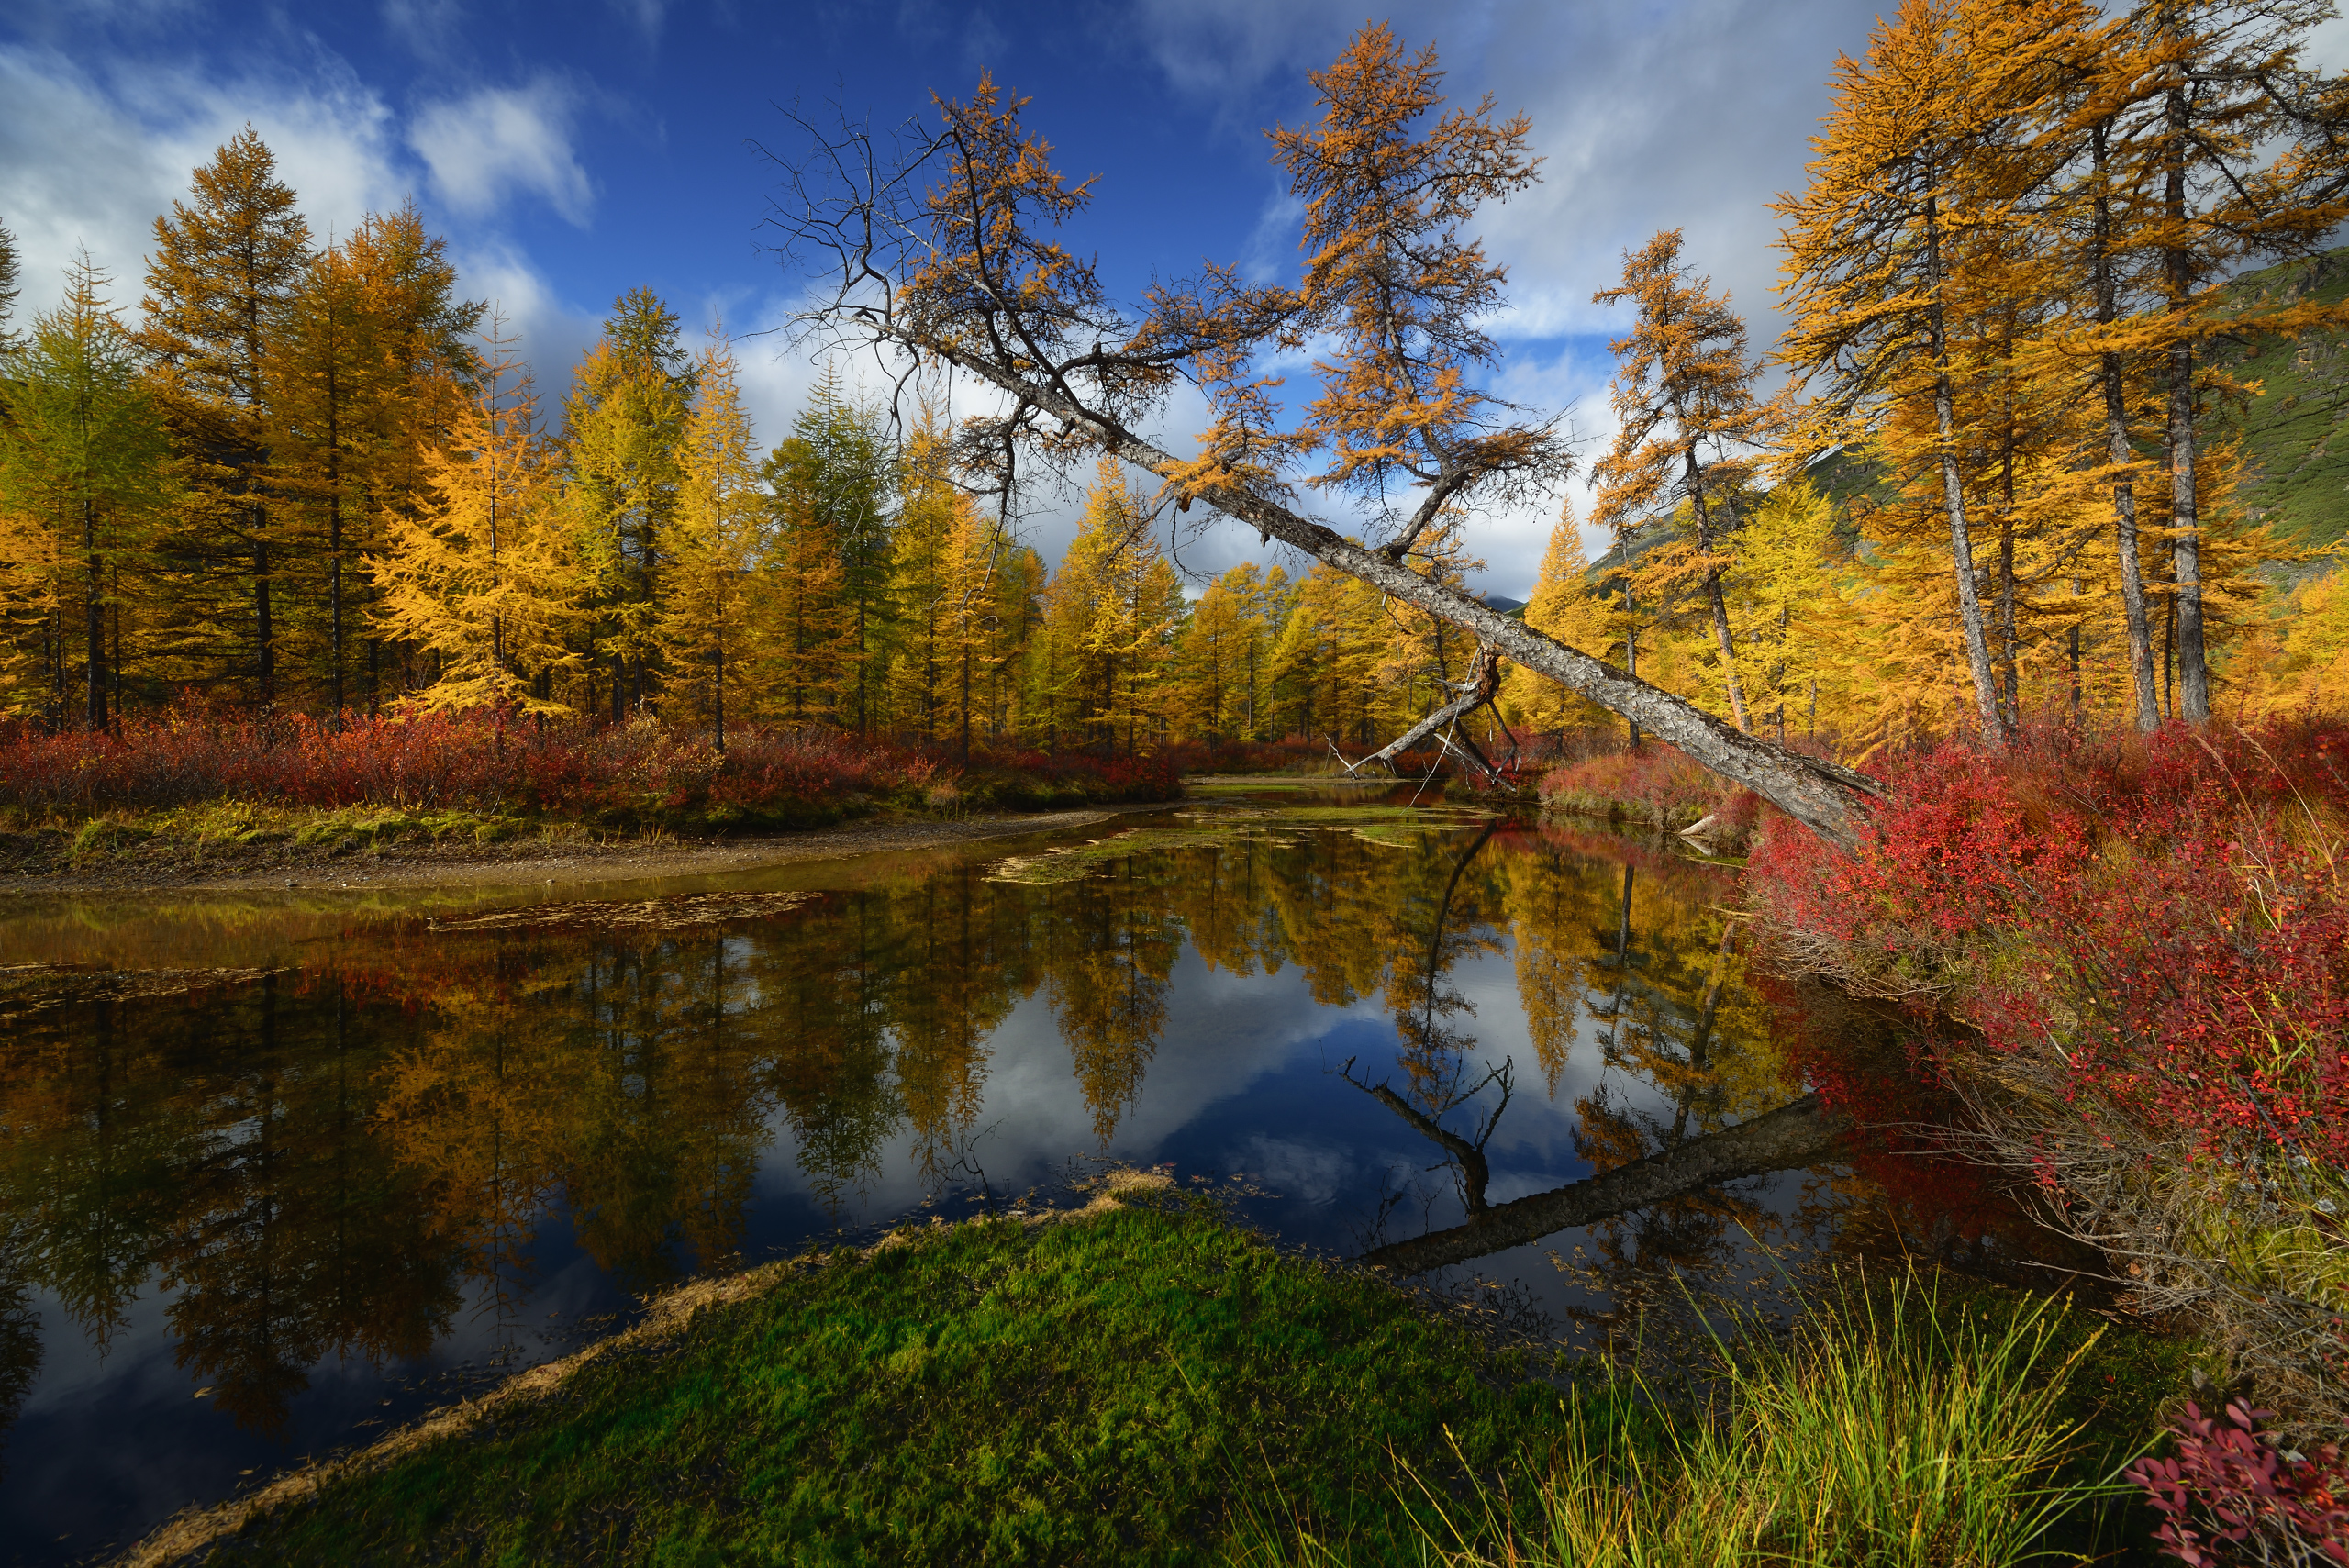 Landscape Nature Sky Clouds Water River Reflection Forest Trees Fall Log Shore Maxim Evdokimov Witho 2560x1709